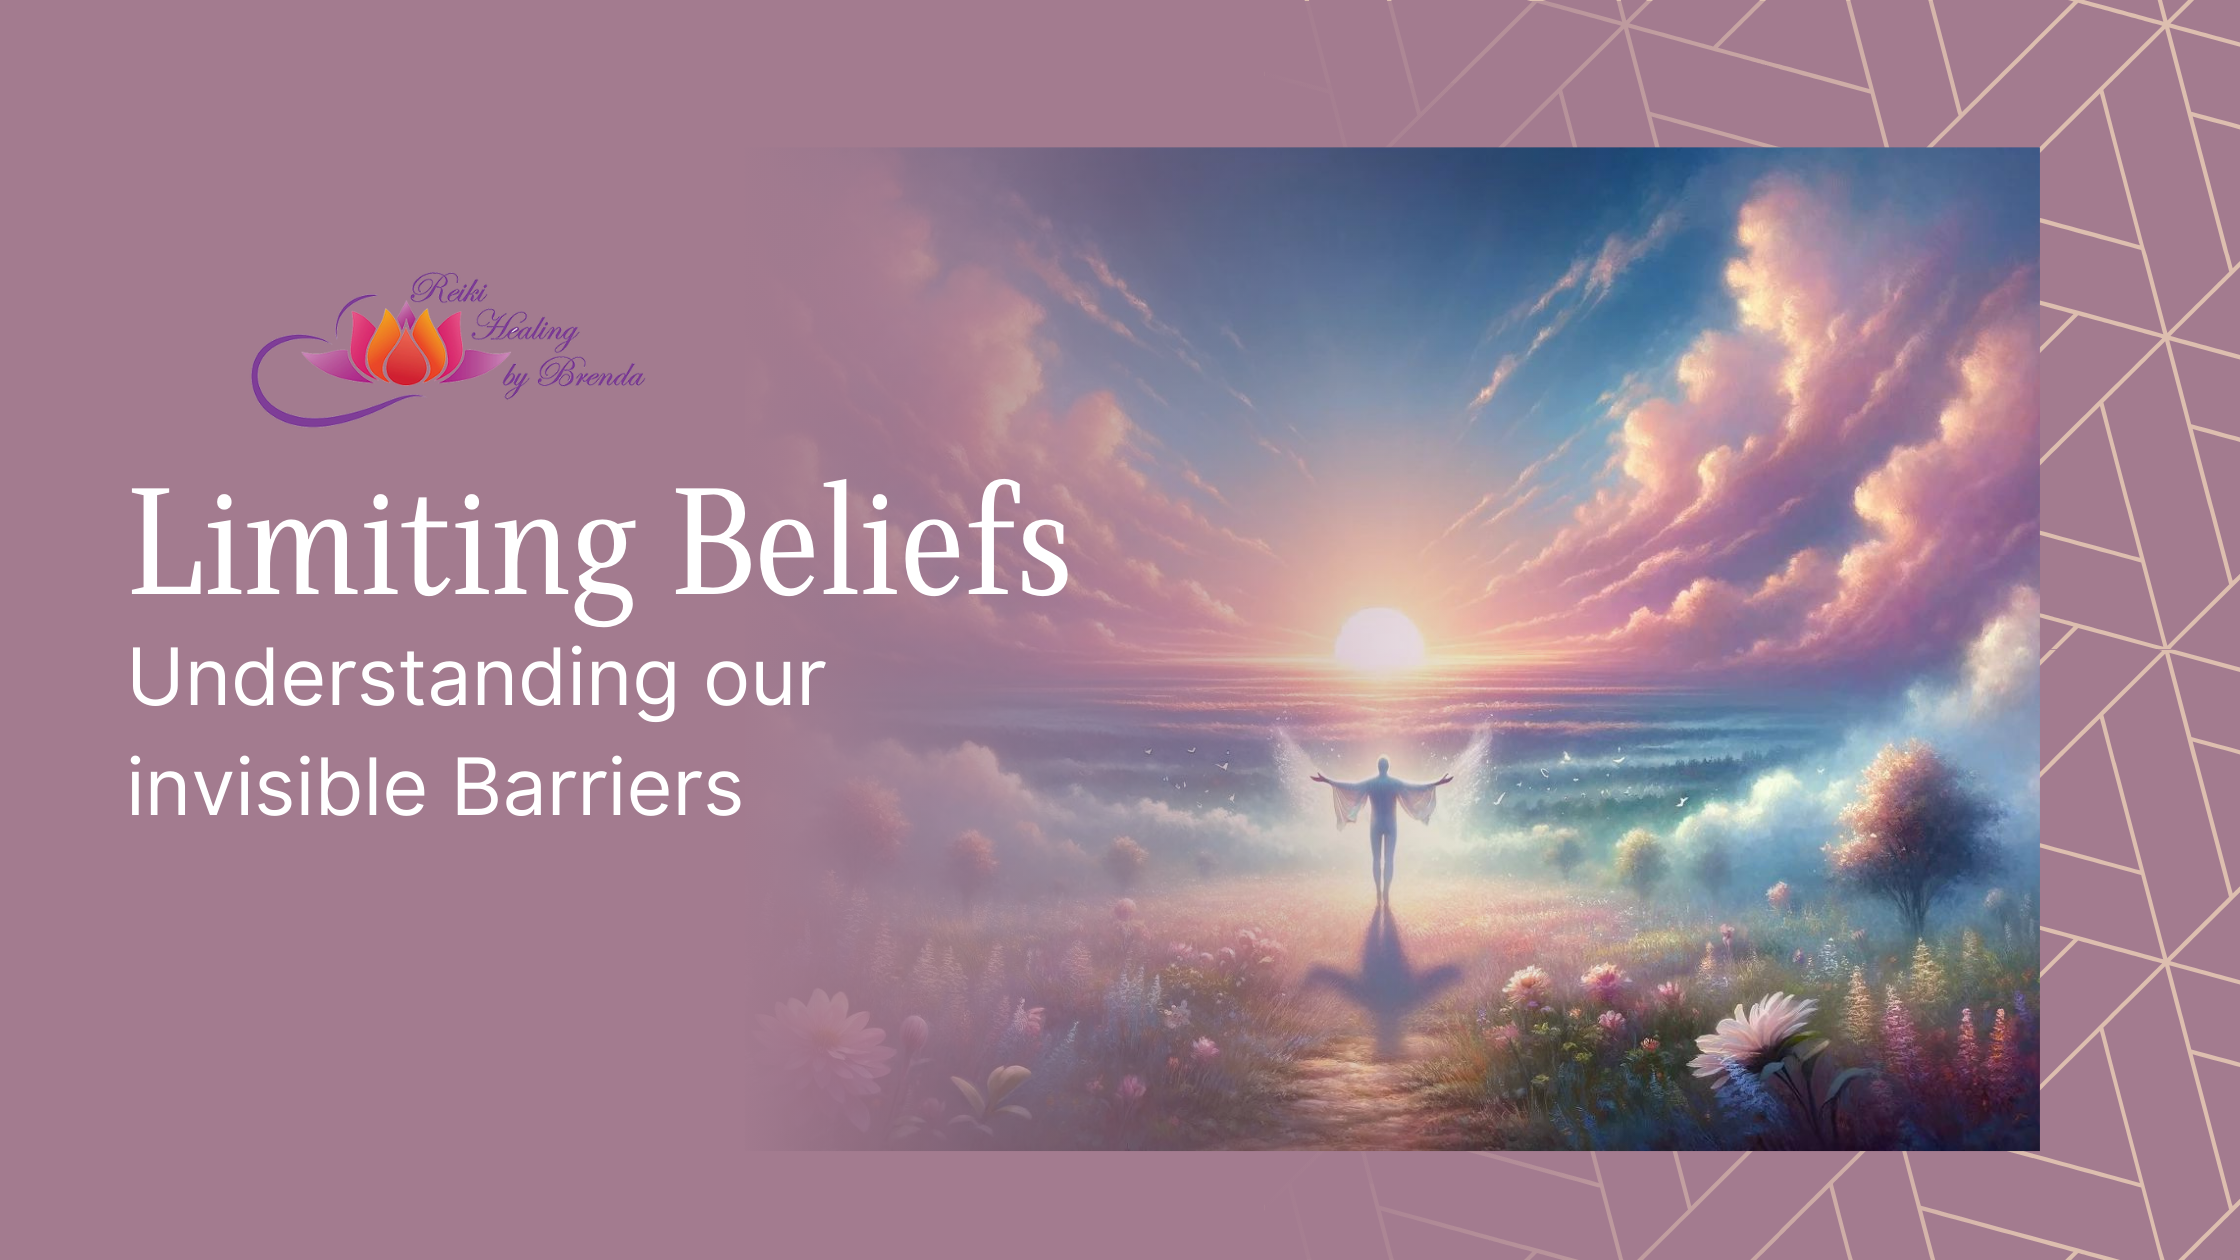 A figure with open arms stands facing a radiant sunrise over a misty, flower-speckled landscape, symbolizing the release of limiting beliefs and embracing new beginnings. The sky above is awash with warm hues of pink and blue, suggesting hope and tranquility. 'Reiki Healing by Brenda' logo is present in the top left corner, with the text 'Limiting Beliefs - Understanding our invisible Barriers' overlaid on the upper half of the image, set against a geometric patterned background.